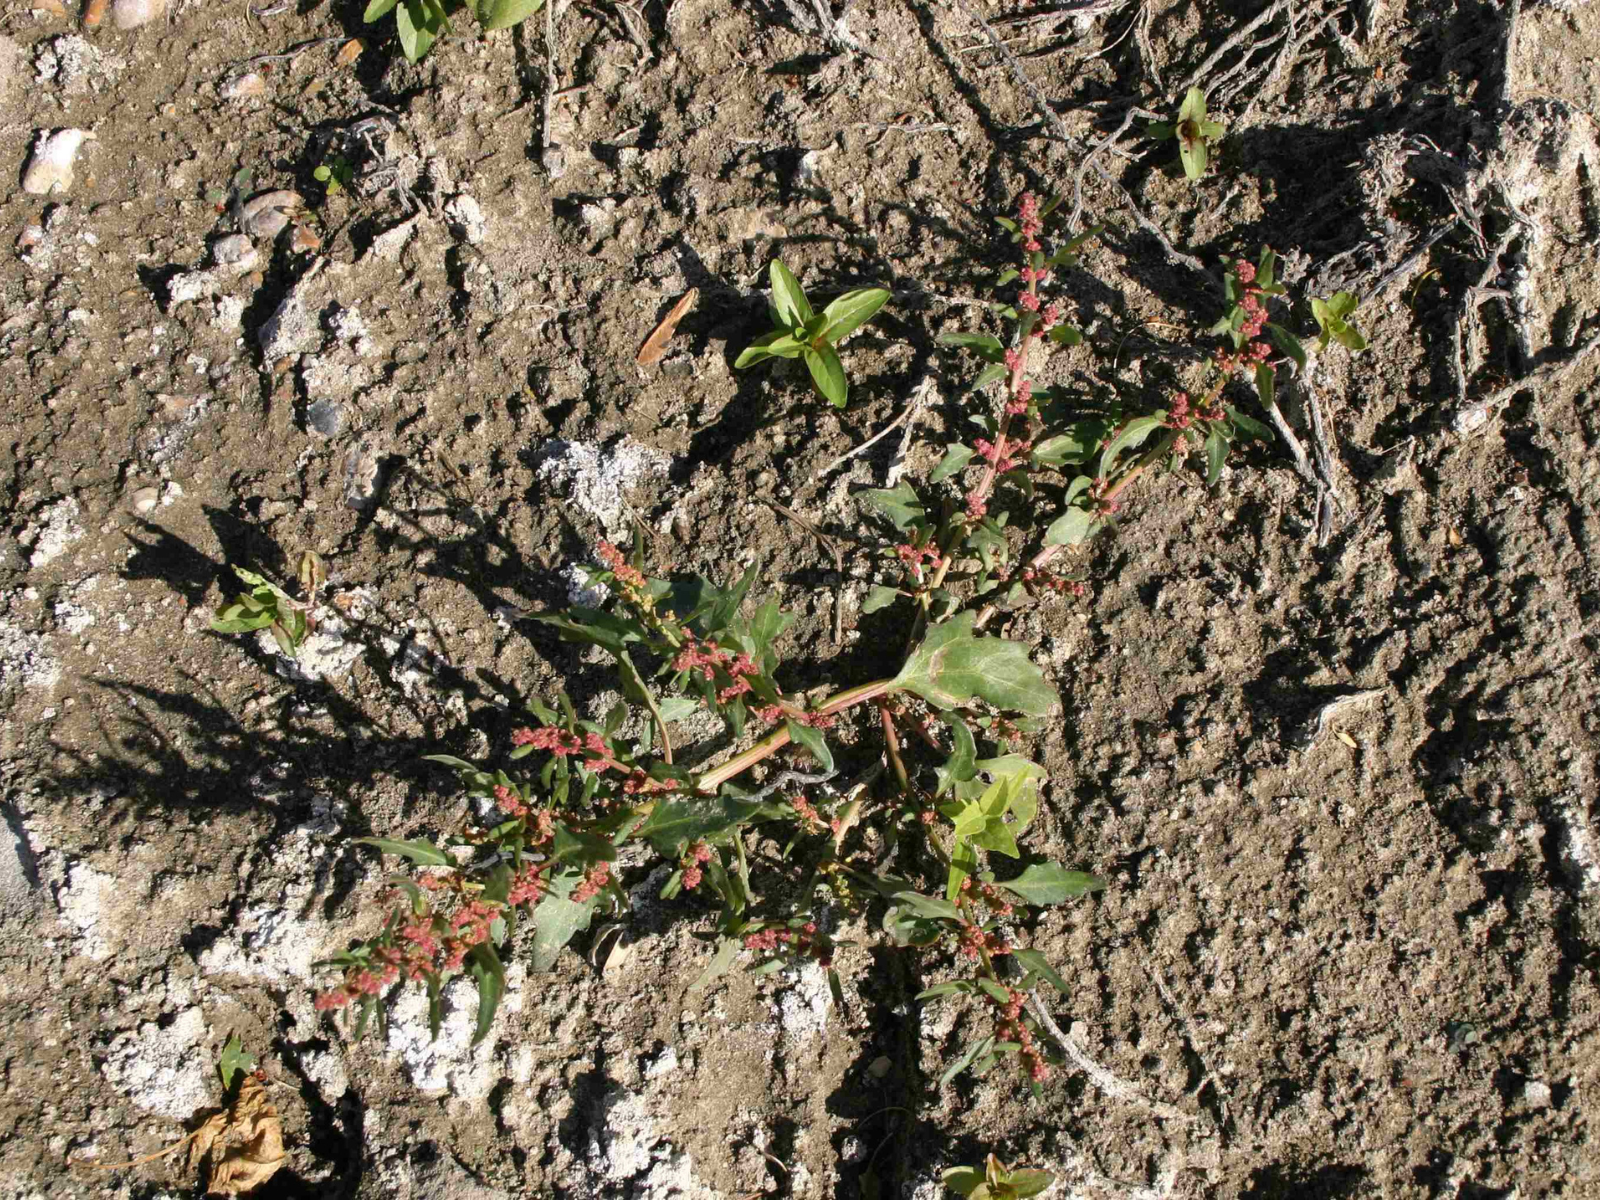 A small plant with waxy green leaves and reddish flower clusters growing from dark sandy soil.